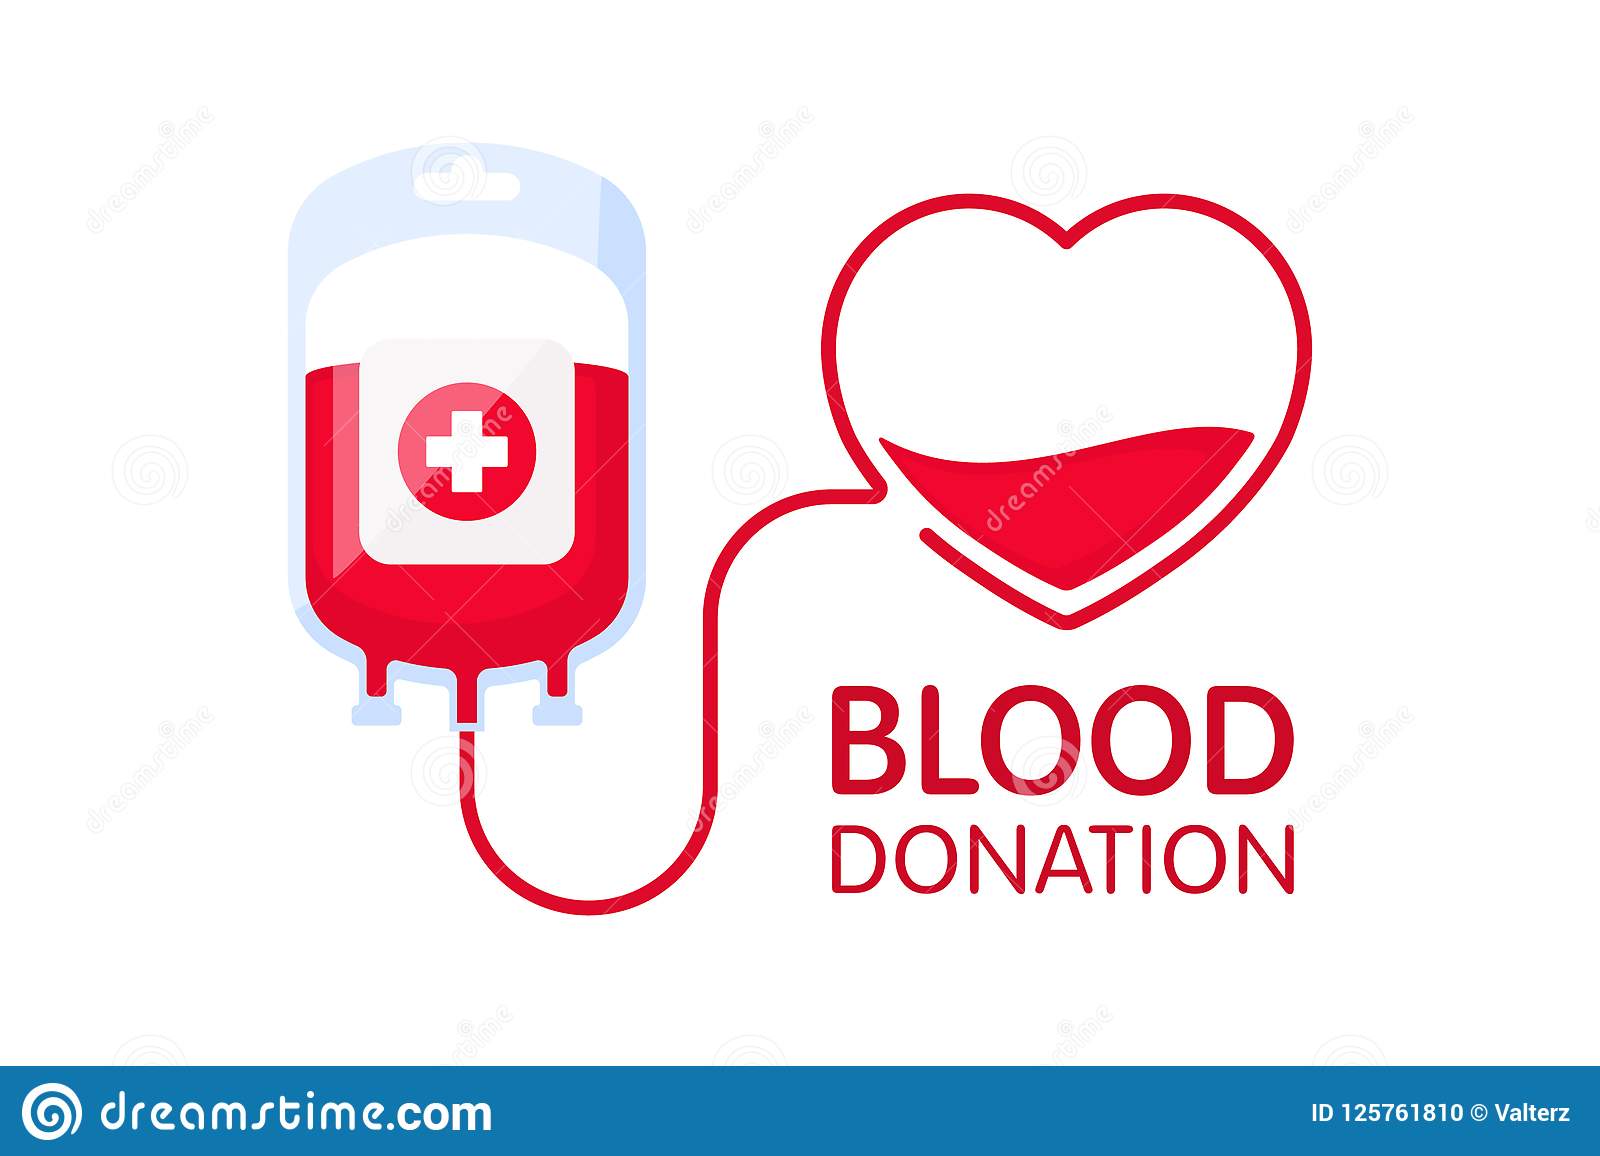 BLOOD DONATION - LET'S DONATE